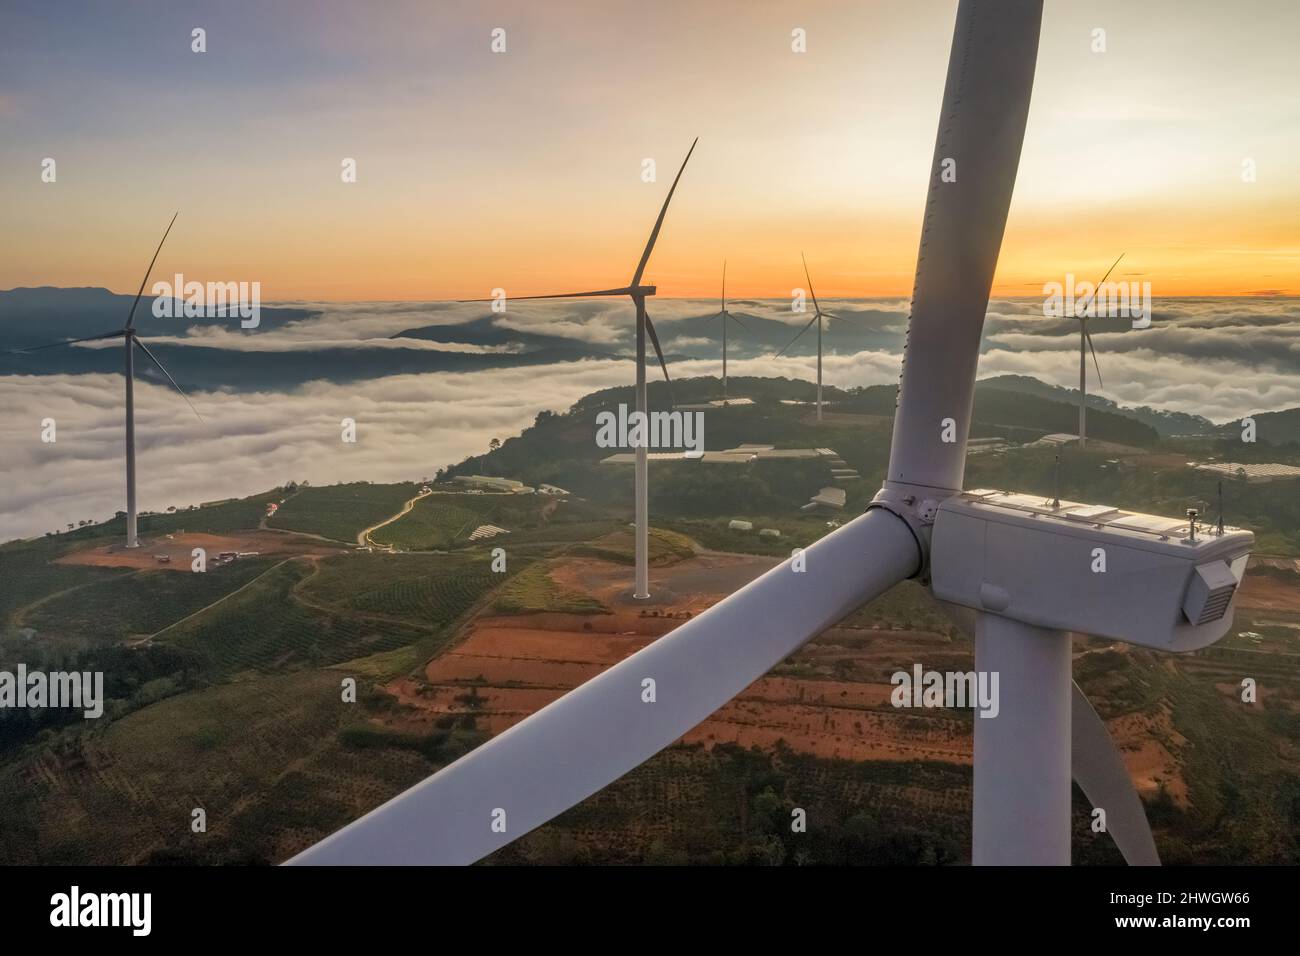 Aerial view of windmill or wind farm in fog  at Cau Dat town, Da Lat city, Lam Dong, Vietnam Stock Photo